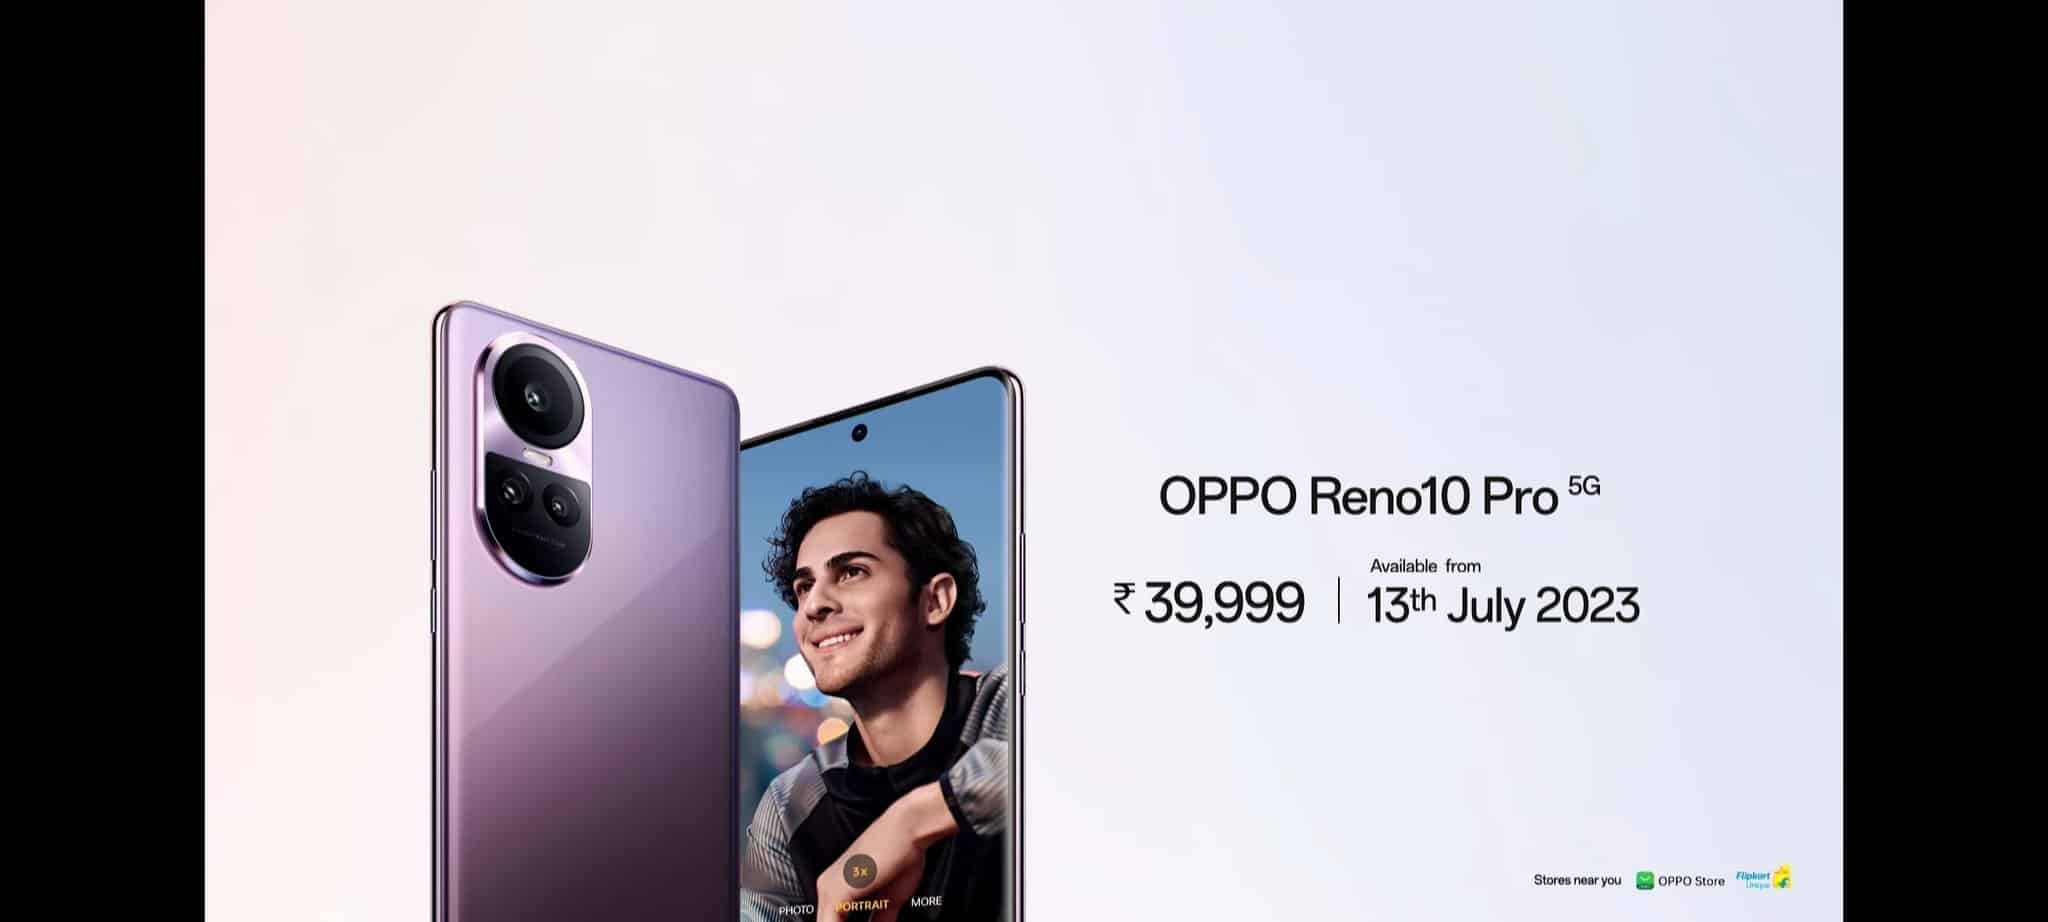 Oppo Reno 10 Pro - Price and Availability